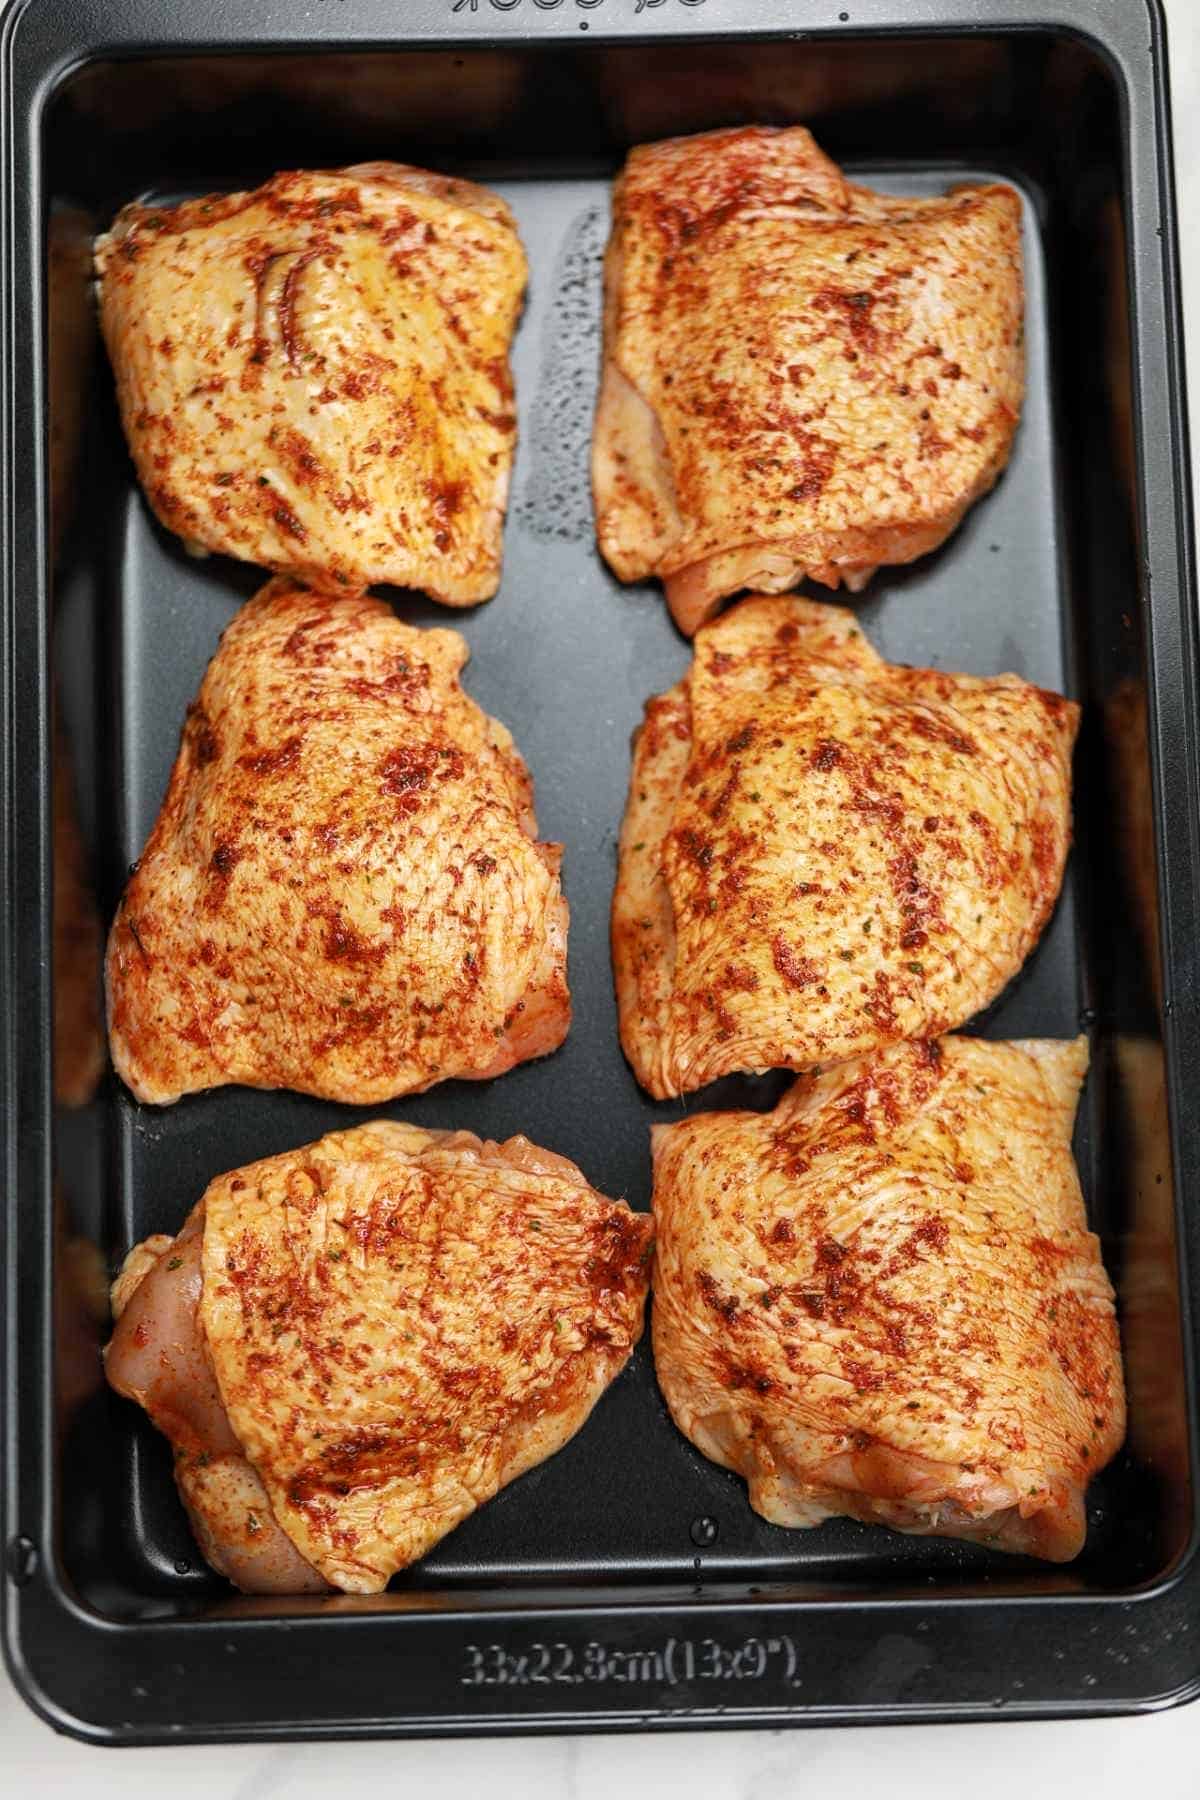 Seasoned chicken thighs on a baking pan.